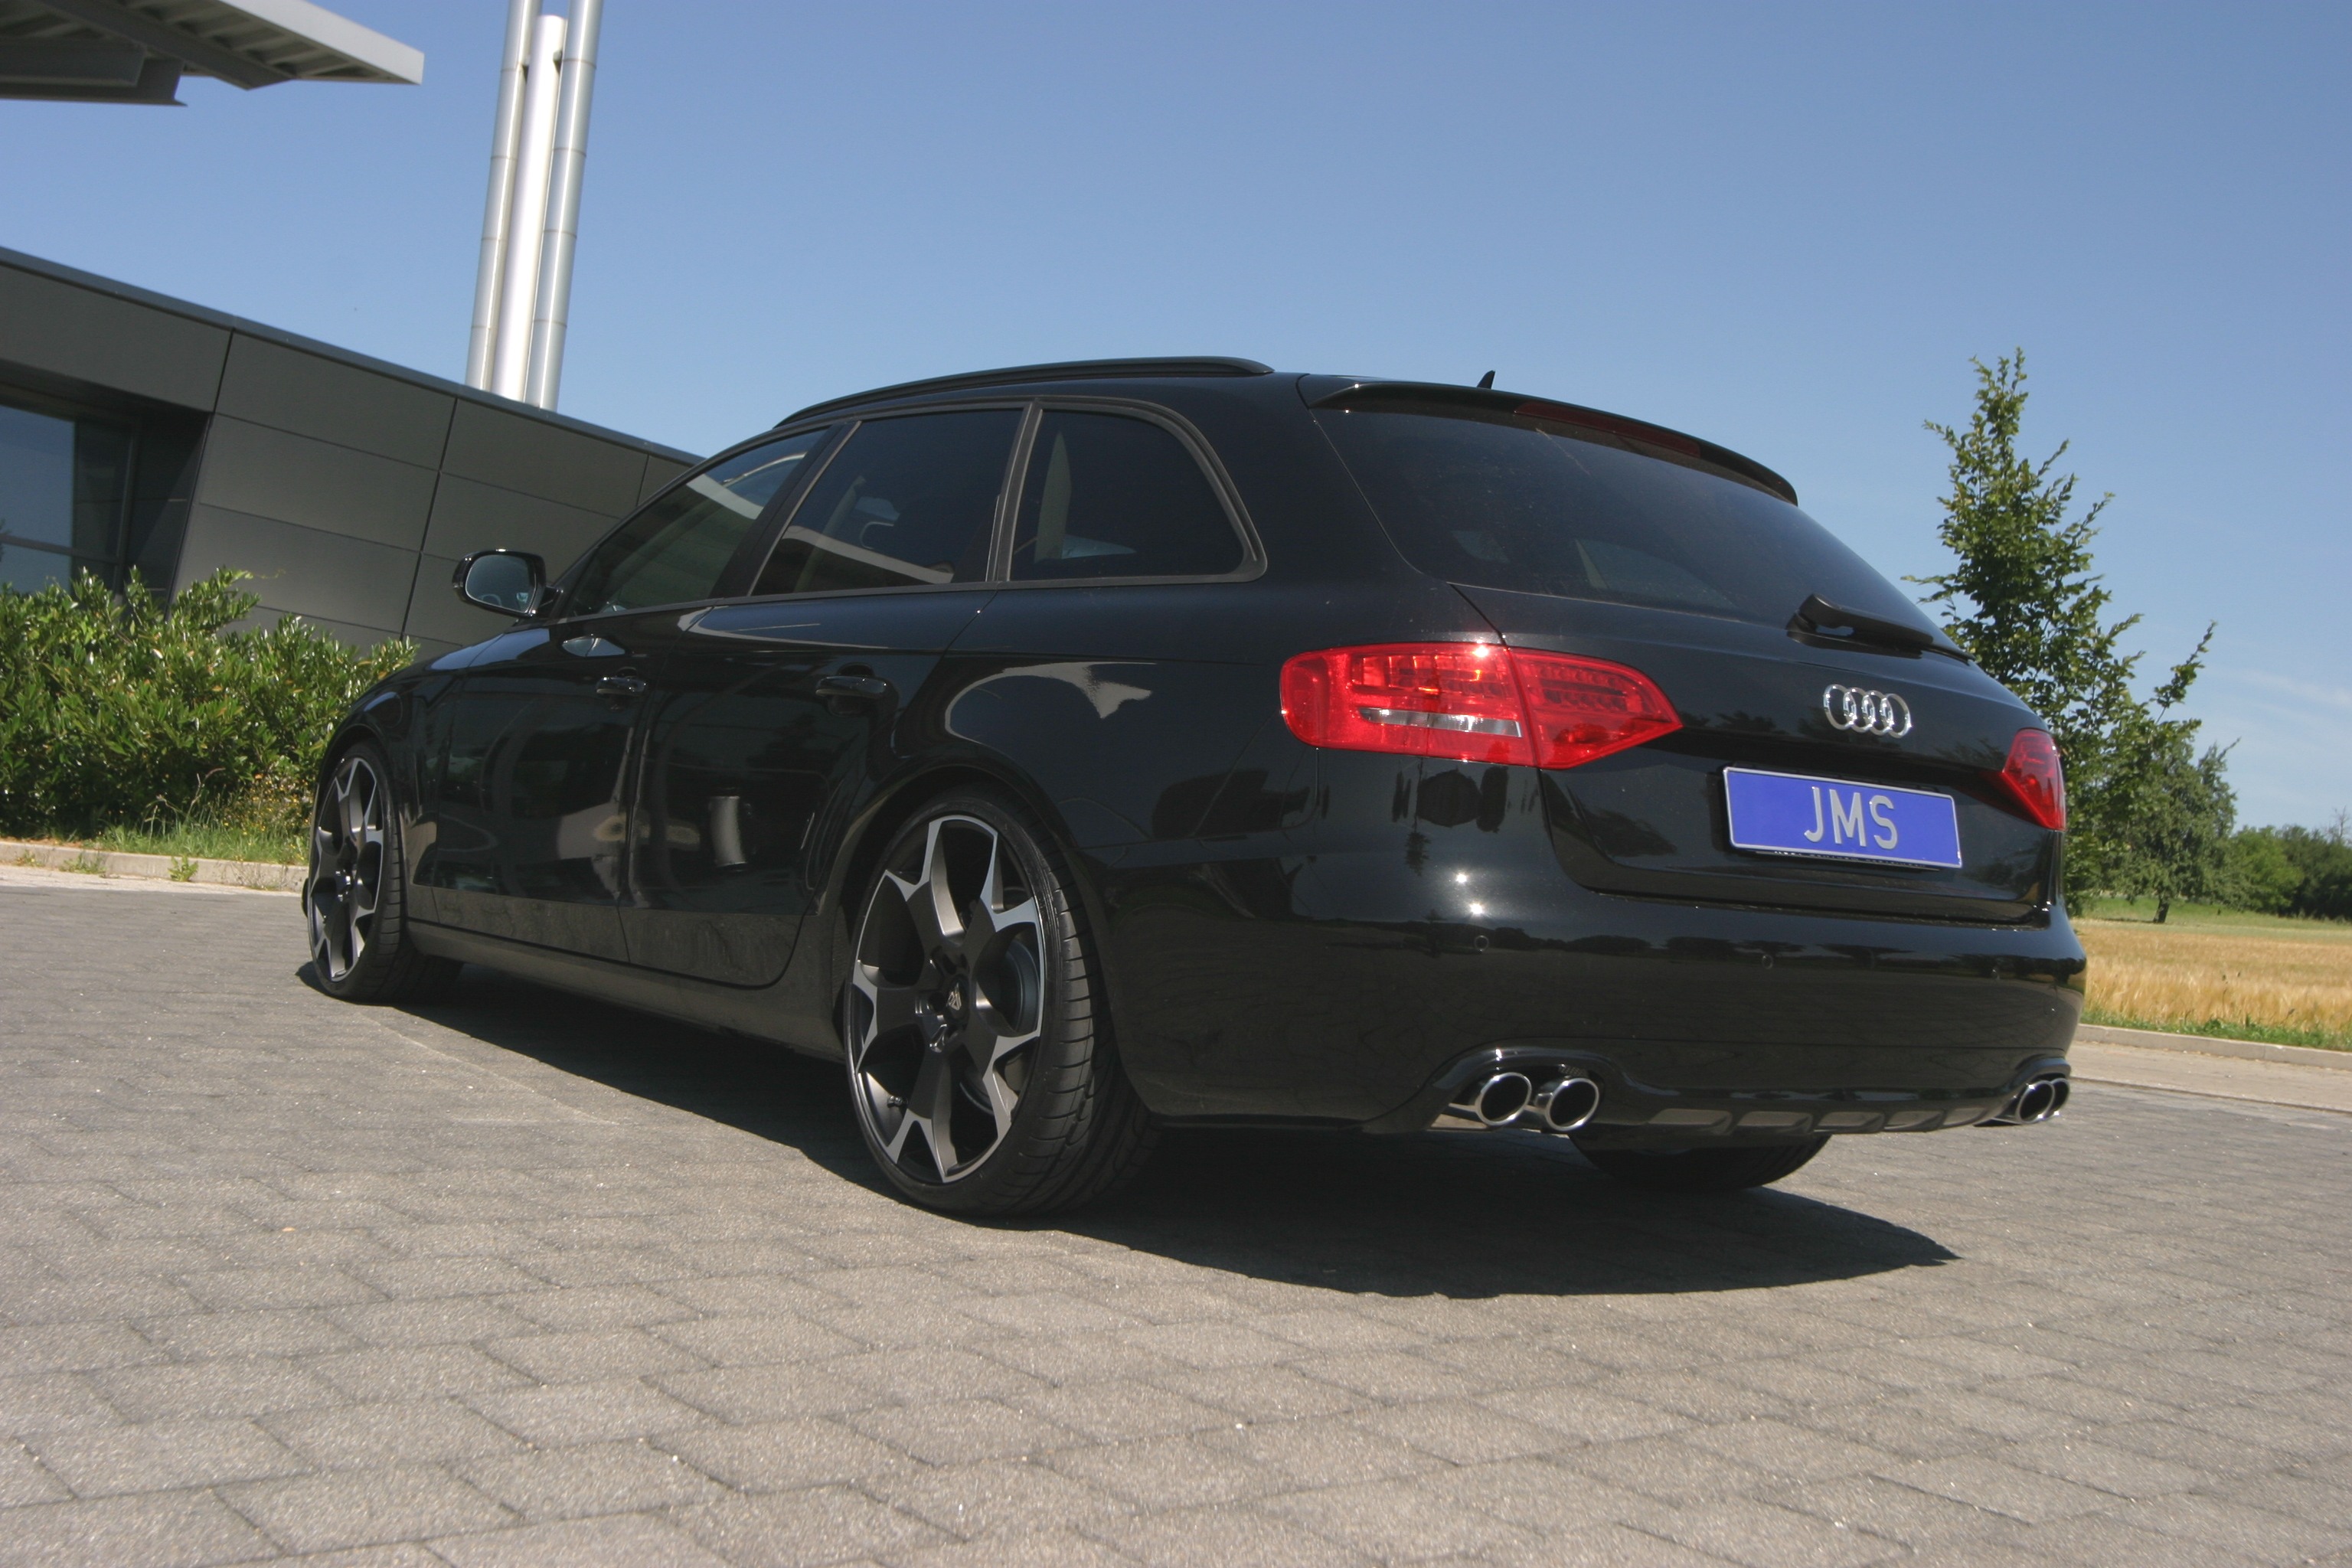 Audi A4 B8 tuning from jms with 20 inch aluminum ghost wheels, JMS -  Fahrzeugteile GmbH, Story - PresseBox